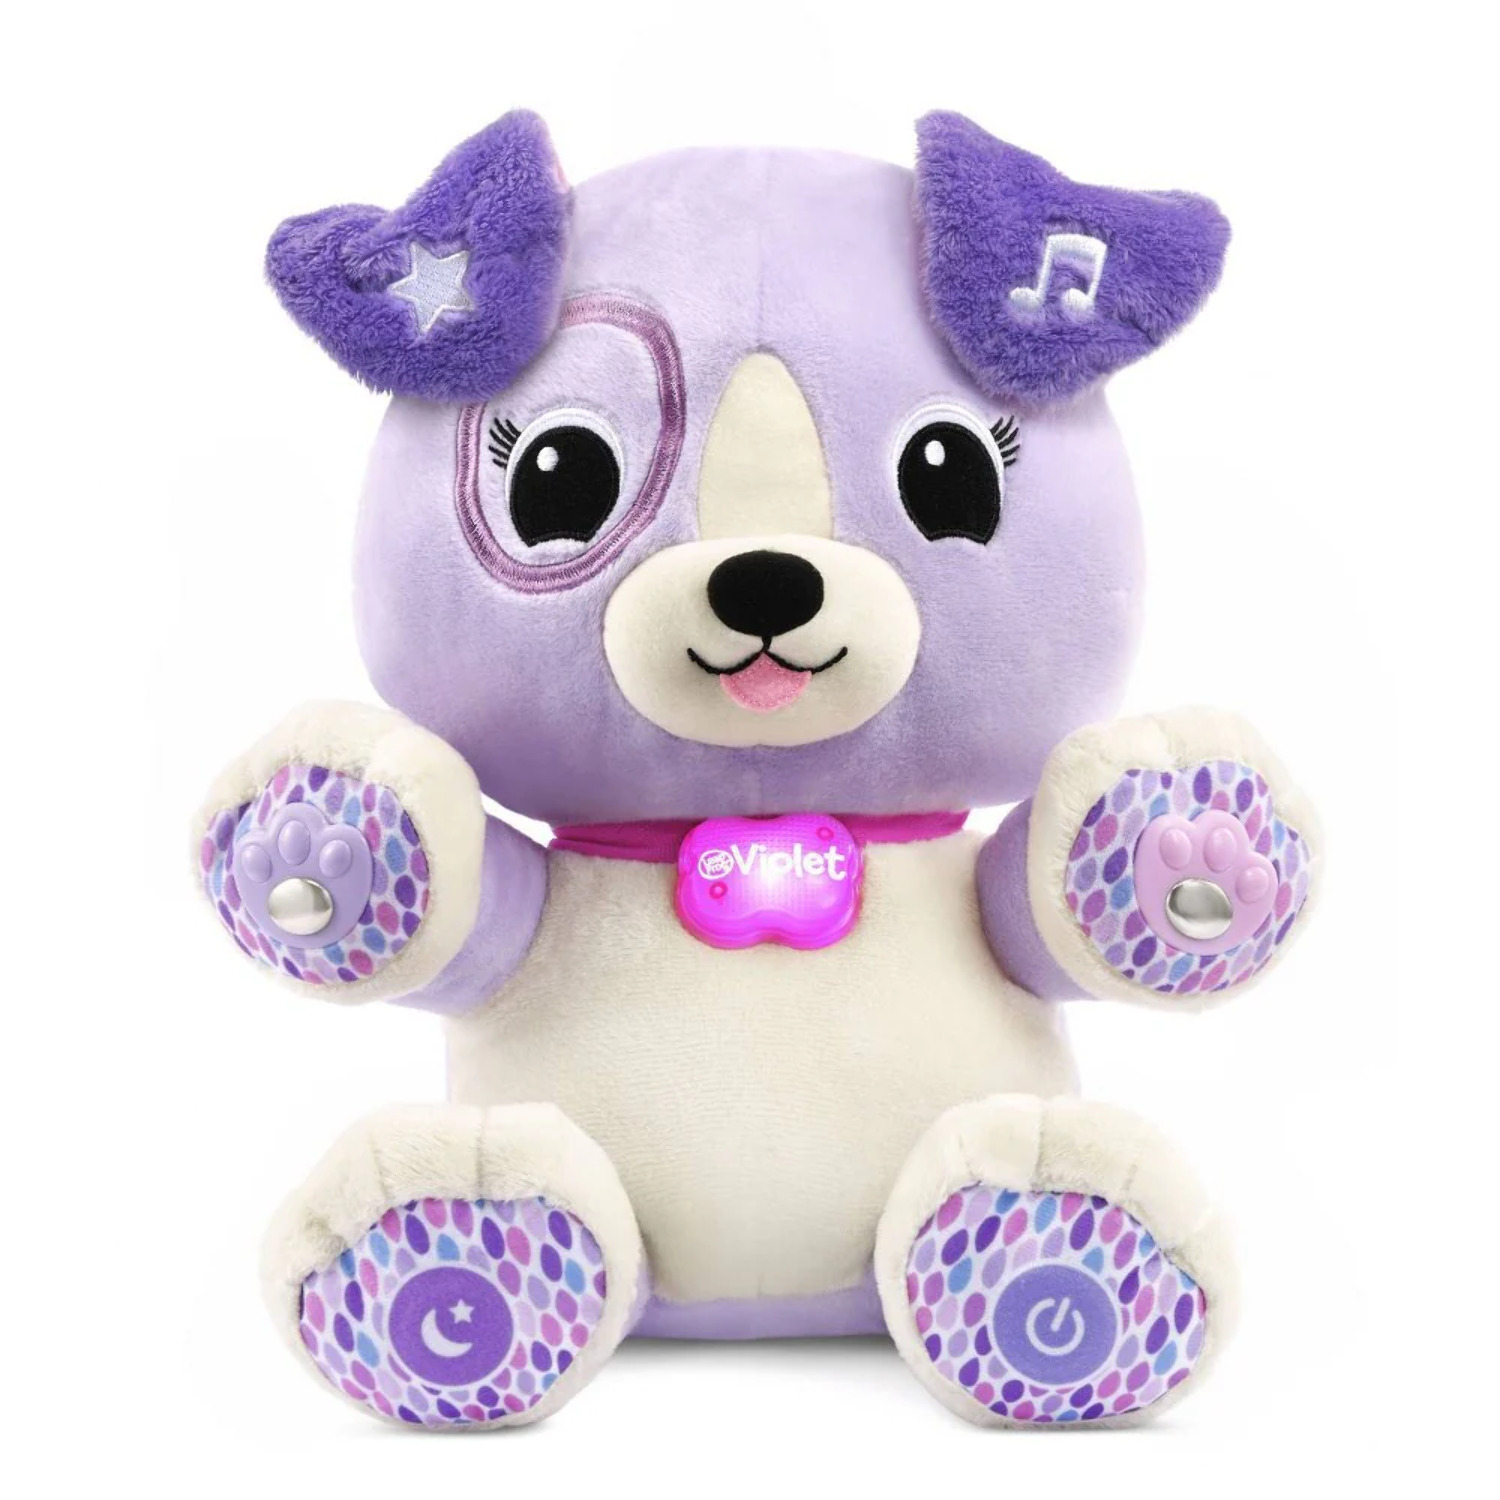 LeapFrog My Pal Violet Personalized Plush Puppy - image 1 of 5